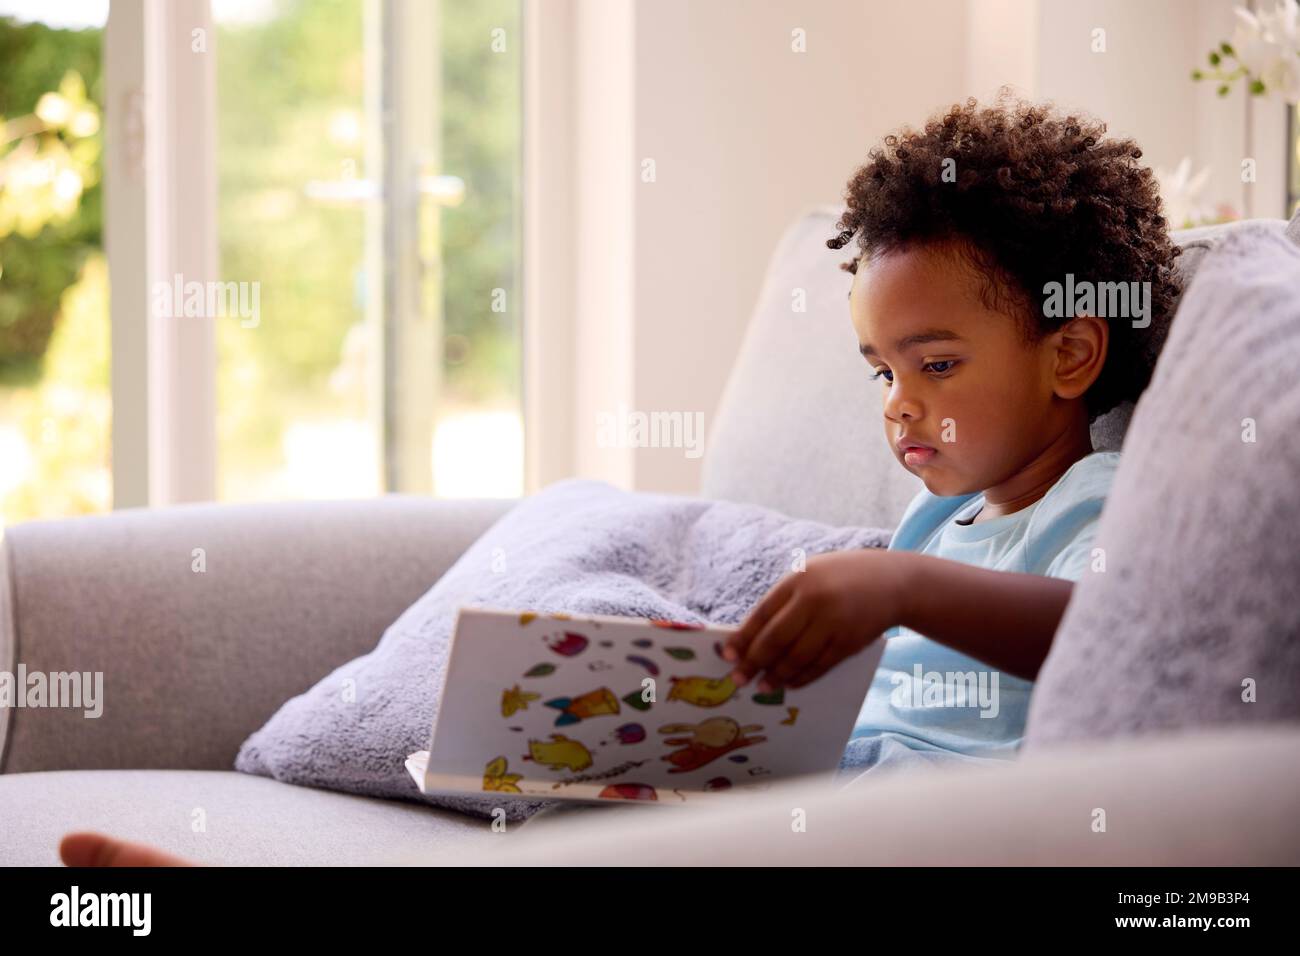 Young Boy Reading Book Sitting On Sofa At Home Stock Photo